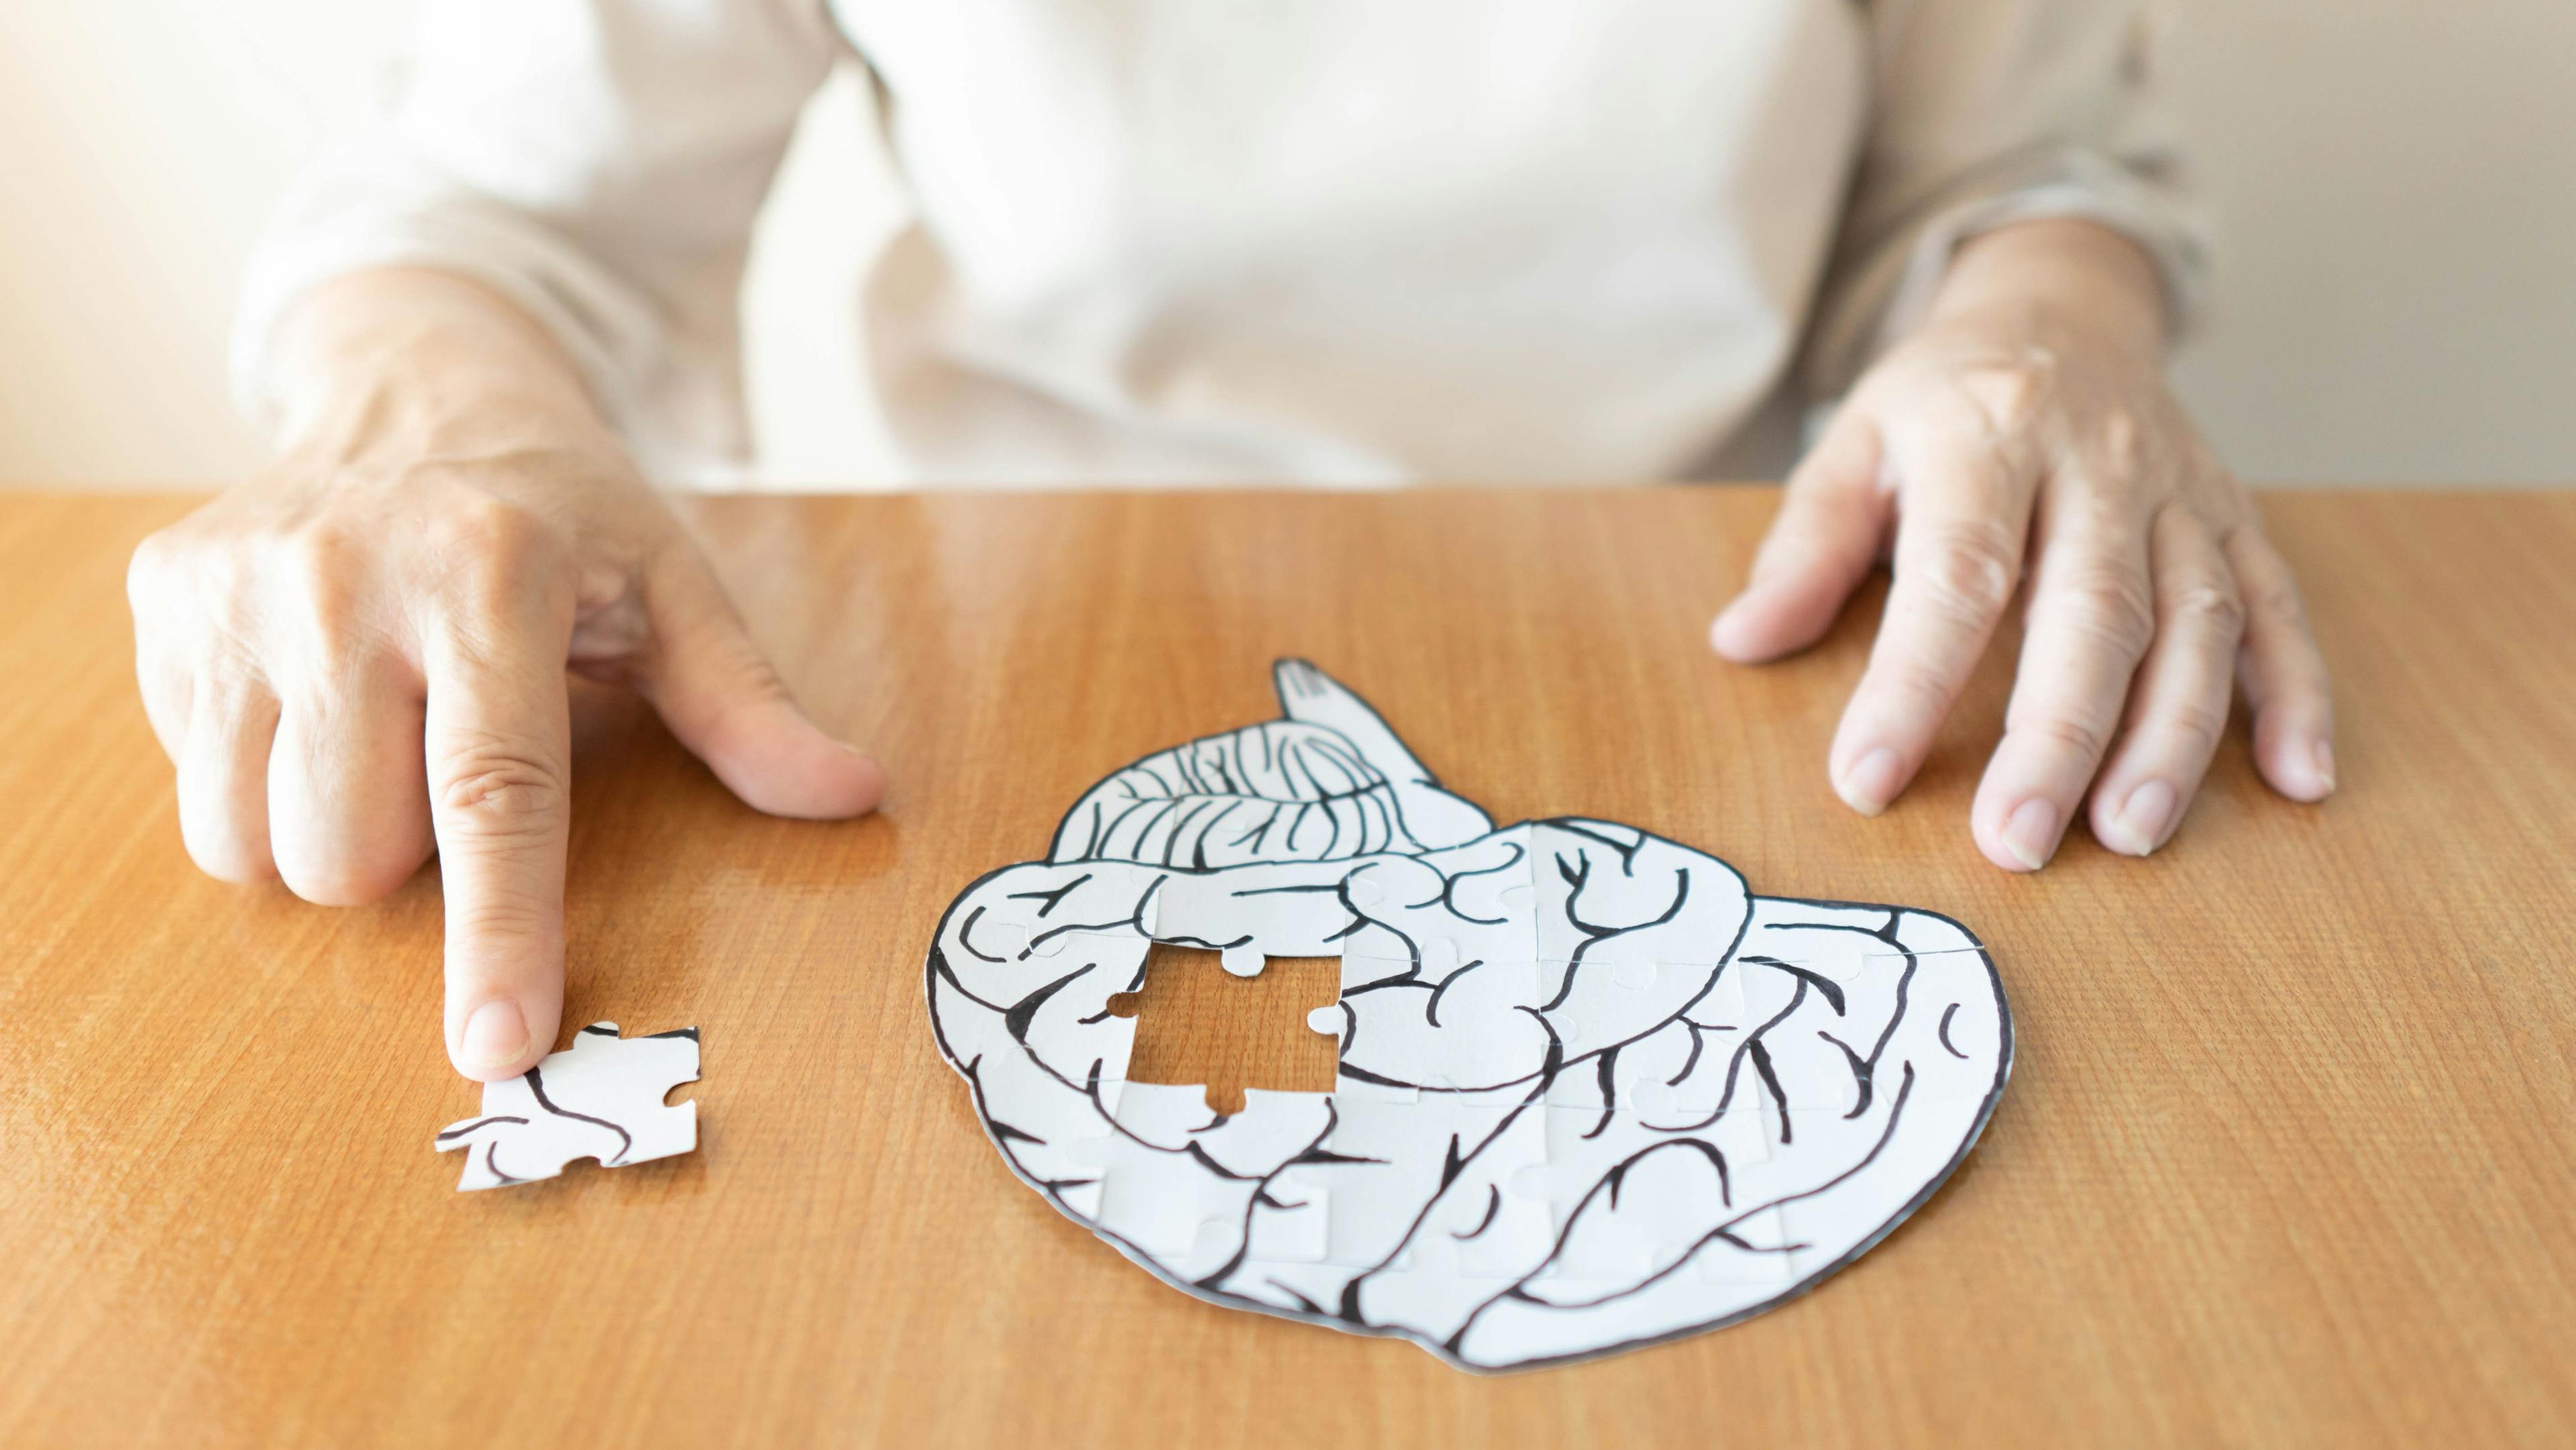 Elderly woman hands putting missing white jigsaw puzzle piece down into the place as a human brain shape | Image Credit: Orawan - stock.adobe.com